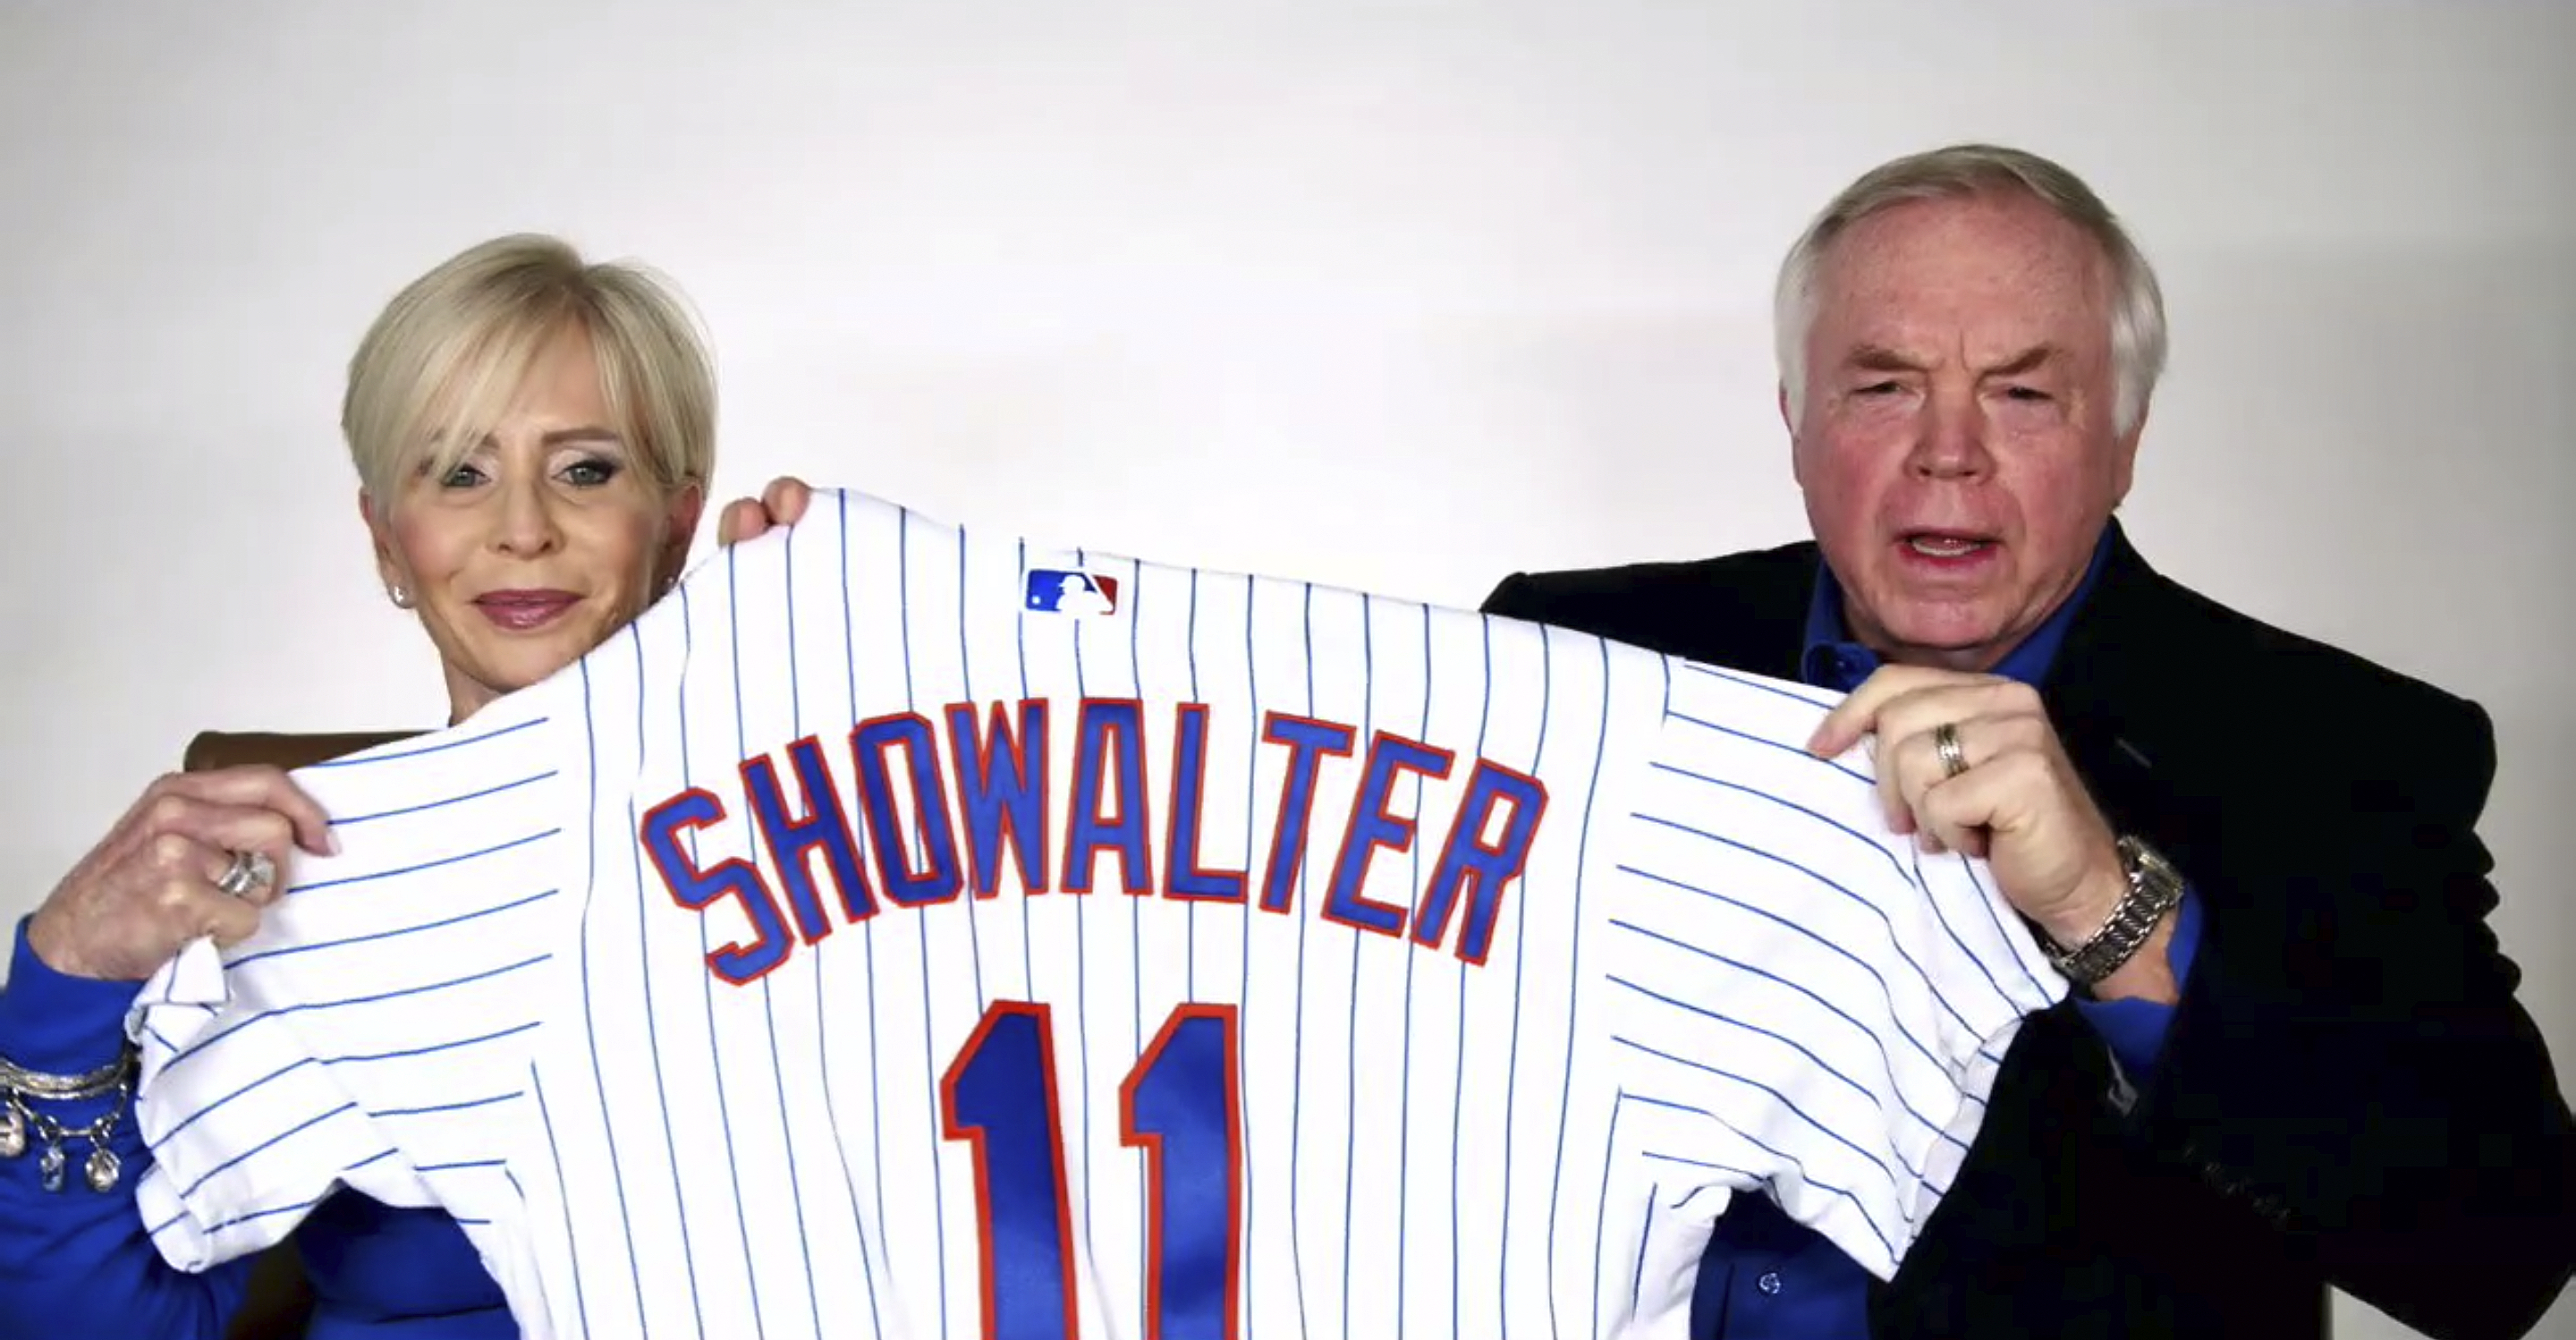 Buck's back: Showalter gets another October shot with Mets